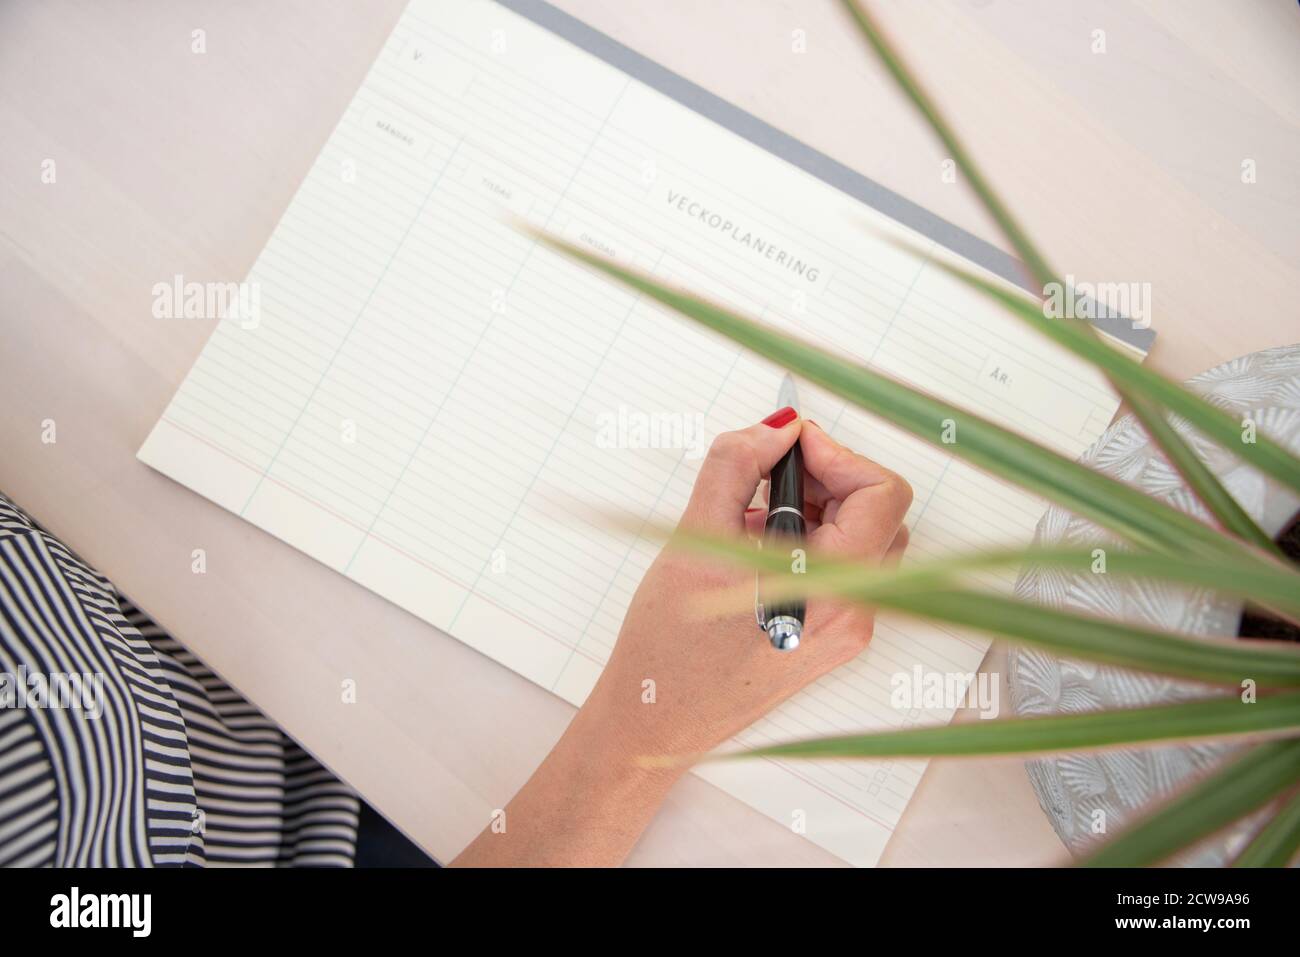 Weekly Planner High Resolution Stock Photography and Images - Alamy